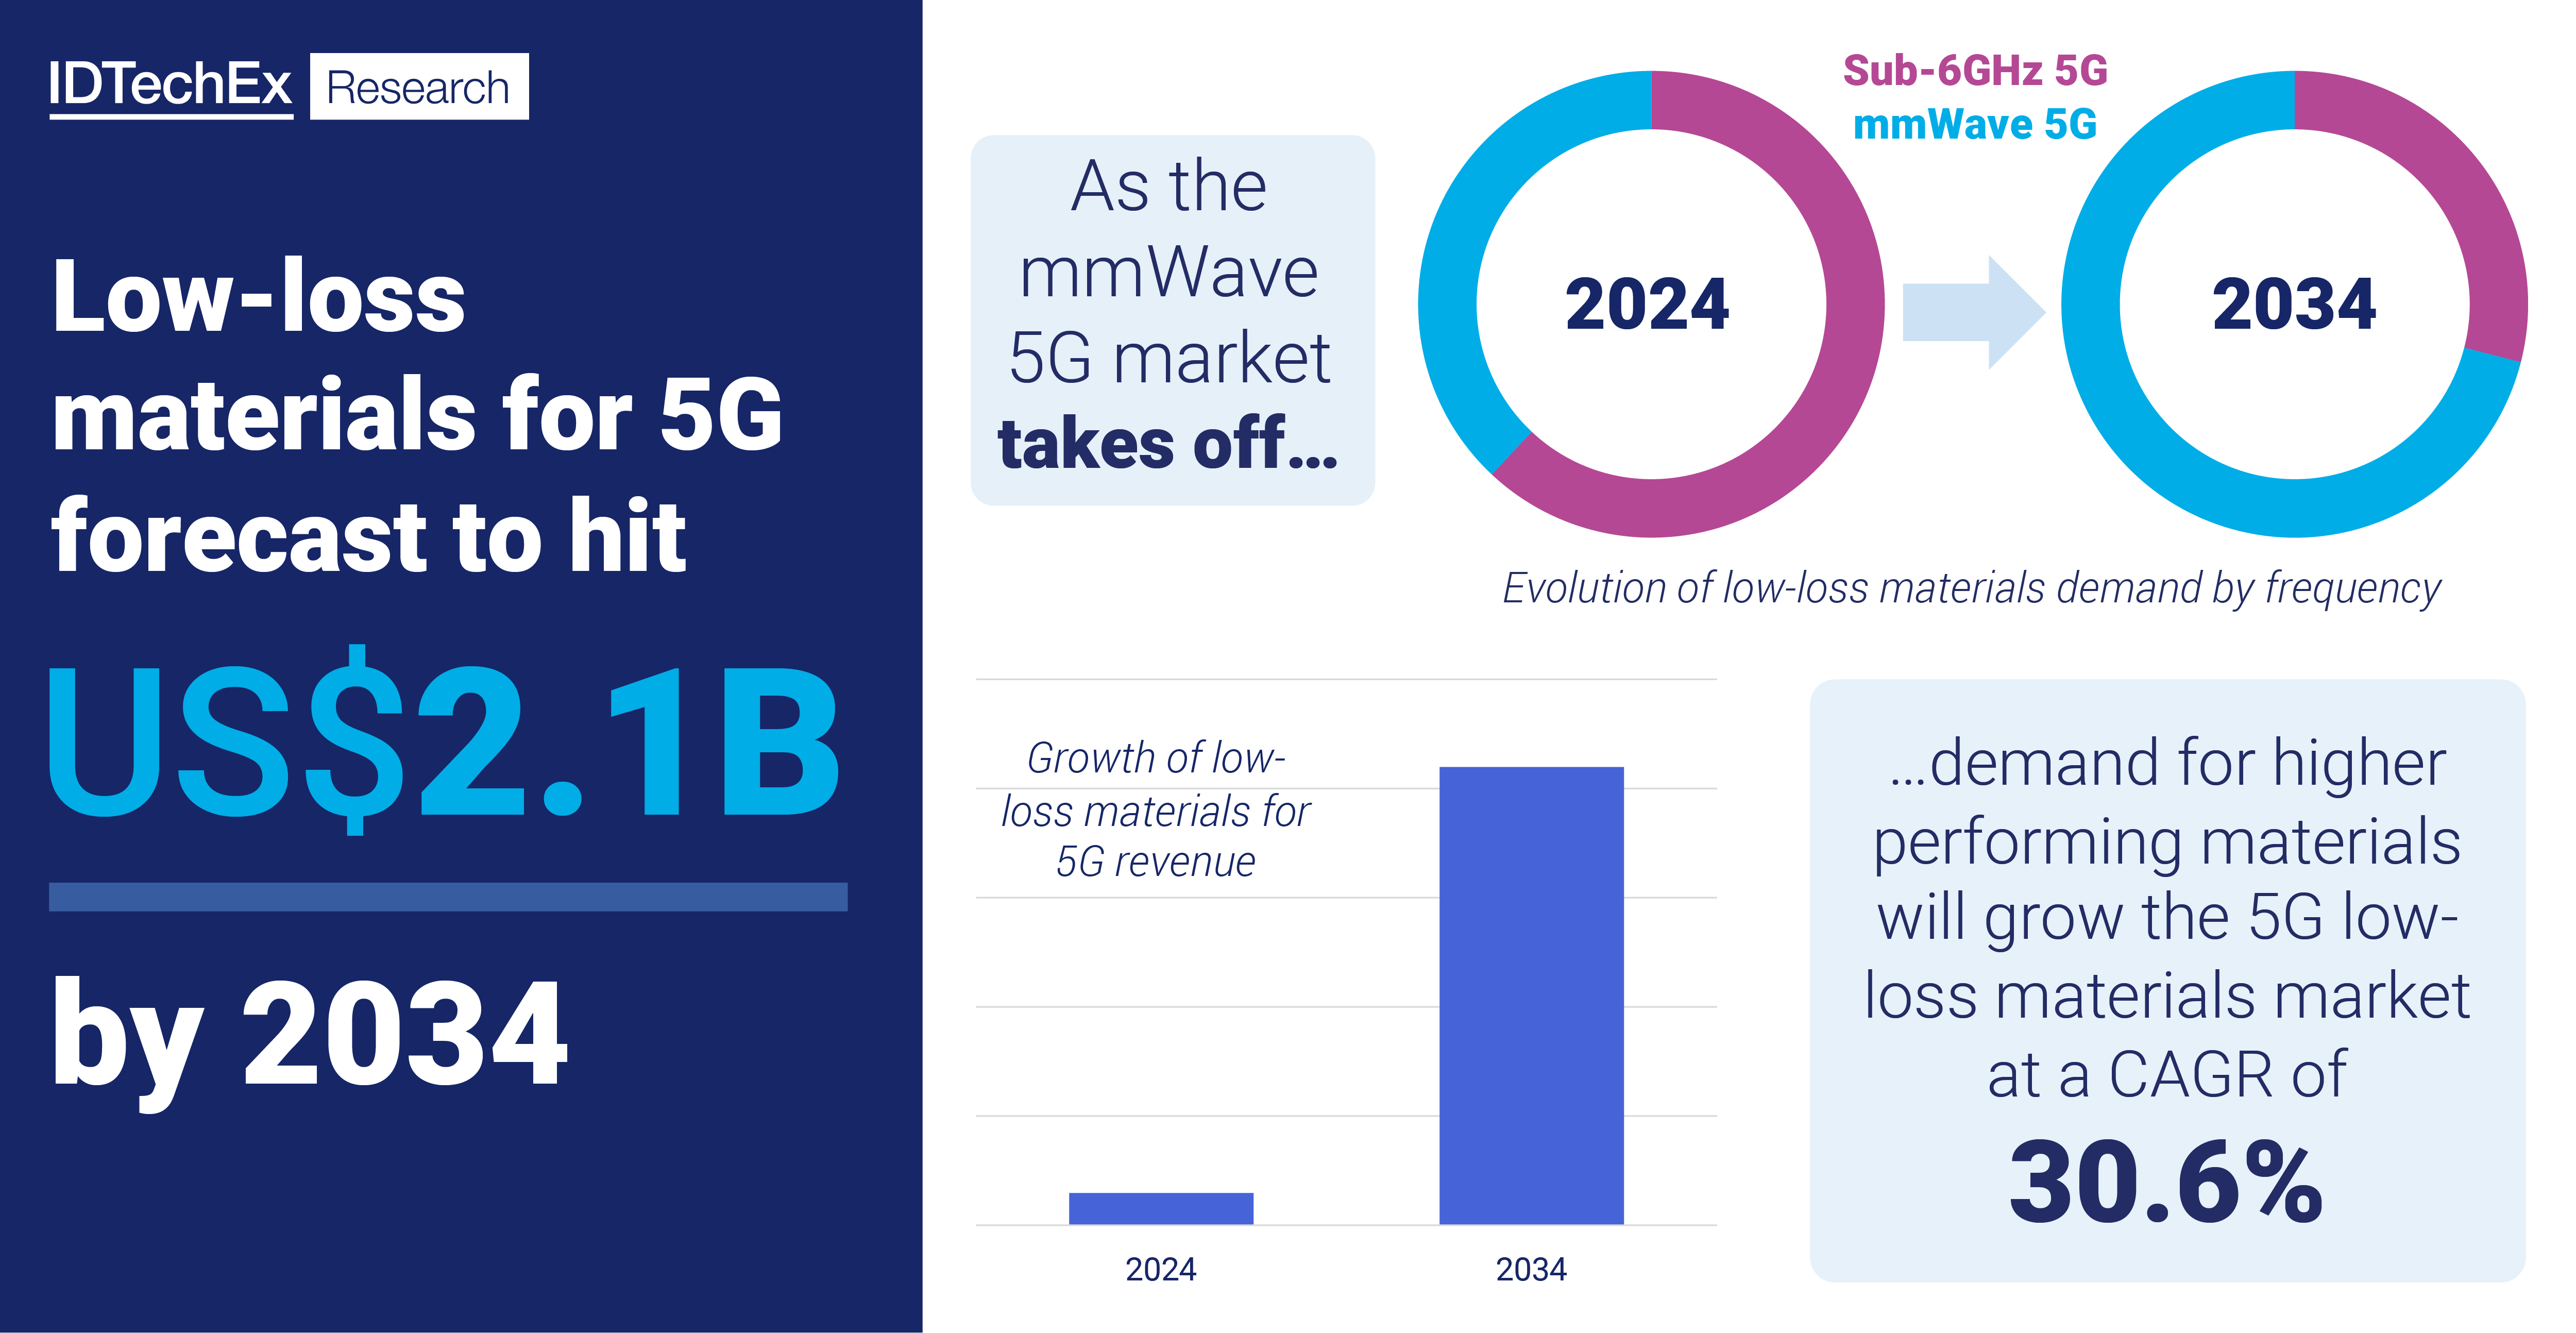 Forecast and growth rate of low-loss materials for 5G. Source: IDTechEx